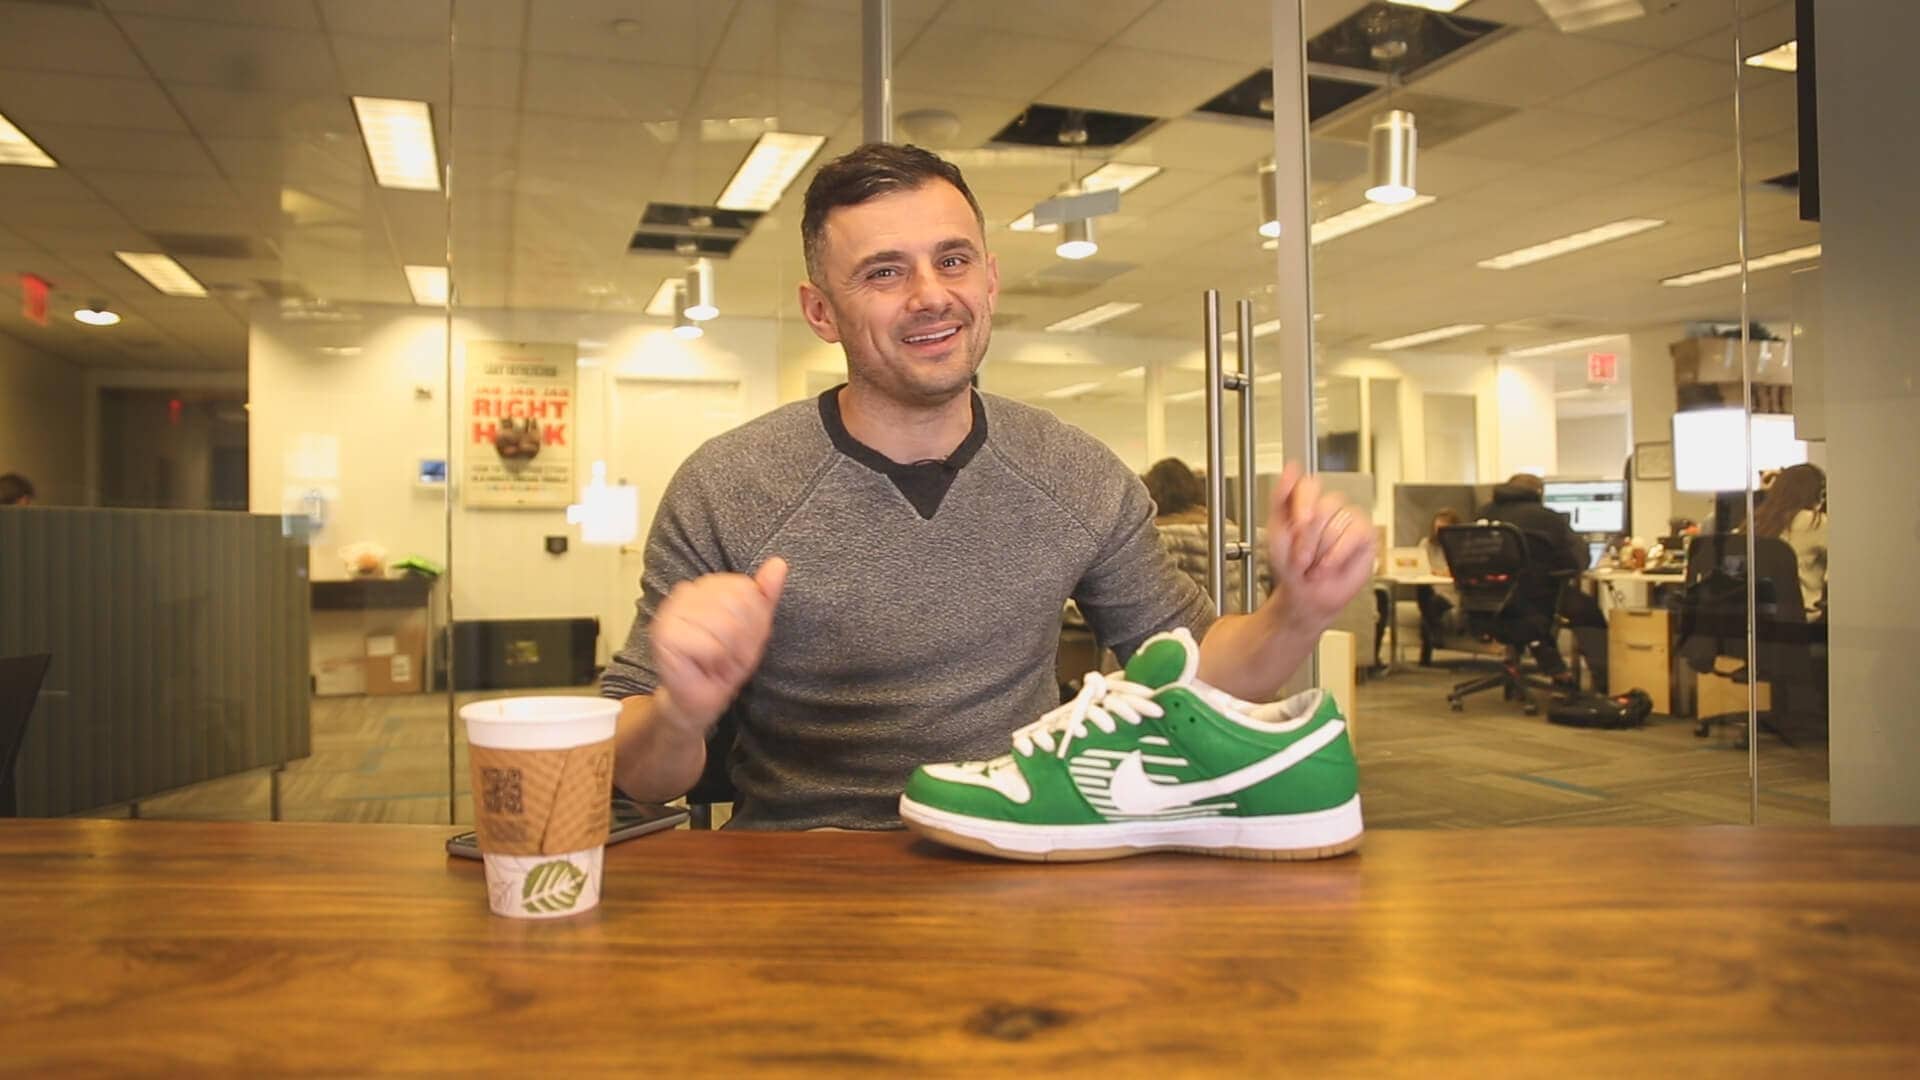 Gary Vaynerchuk talking about his New York Jets Nike's on the #AskGaryVee Show